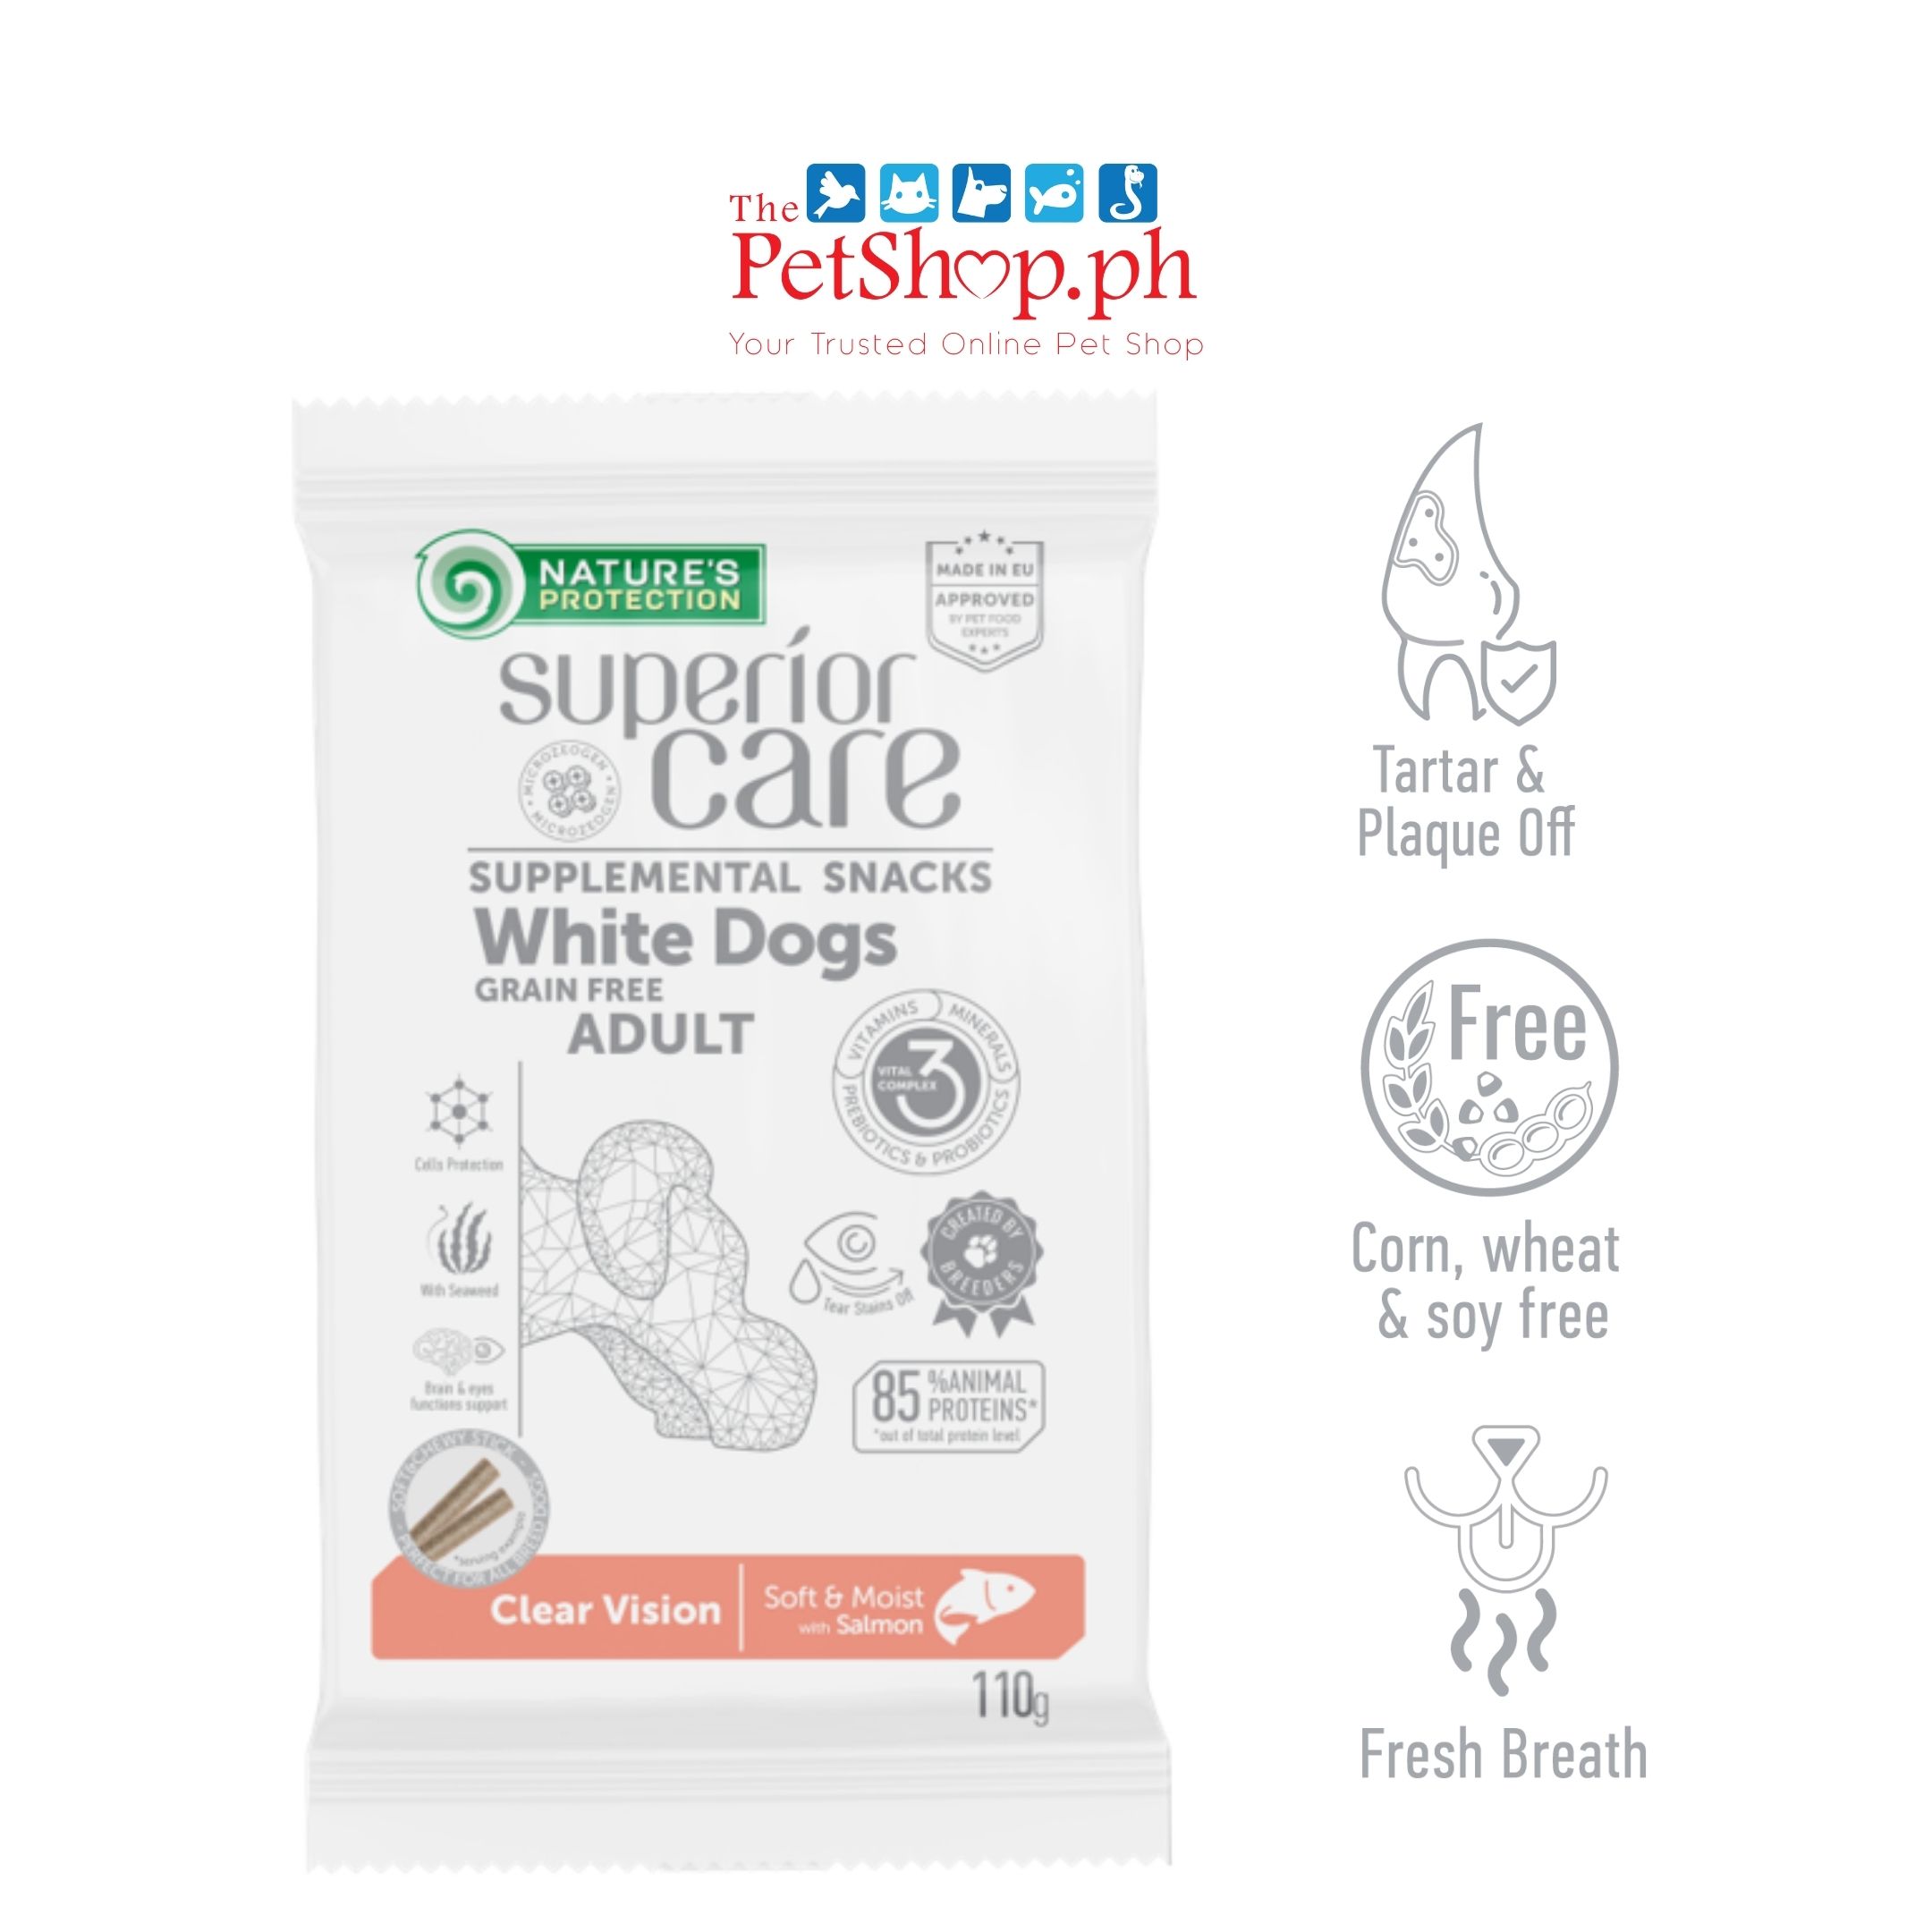 Nature's Protection Superior Care Supplemental Snacks for White Dogs - Clear Vision with Salmon 110g 	